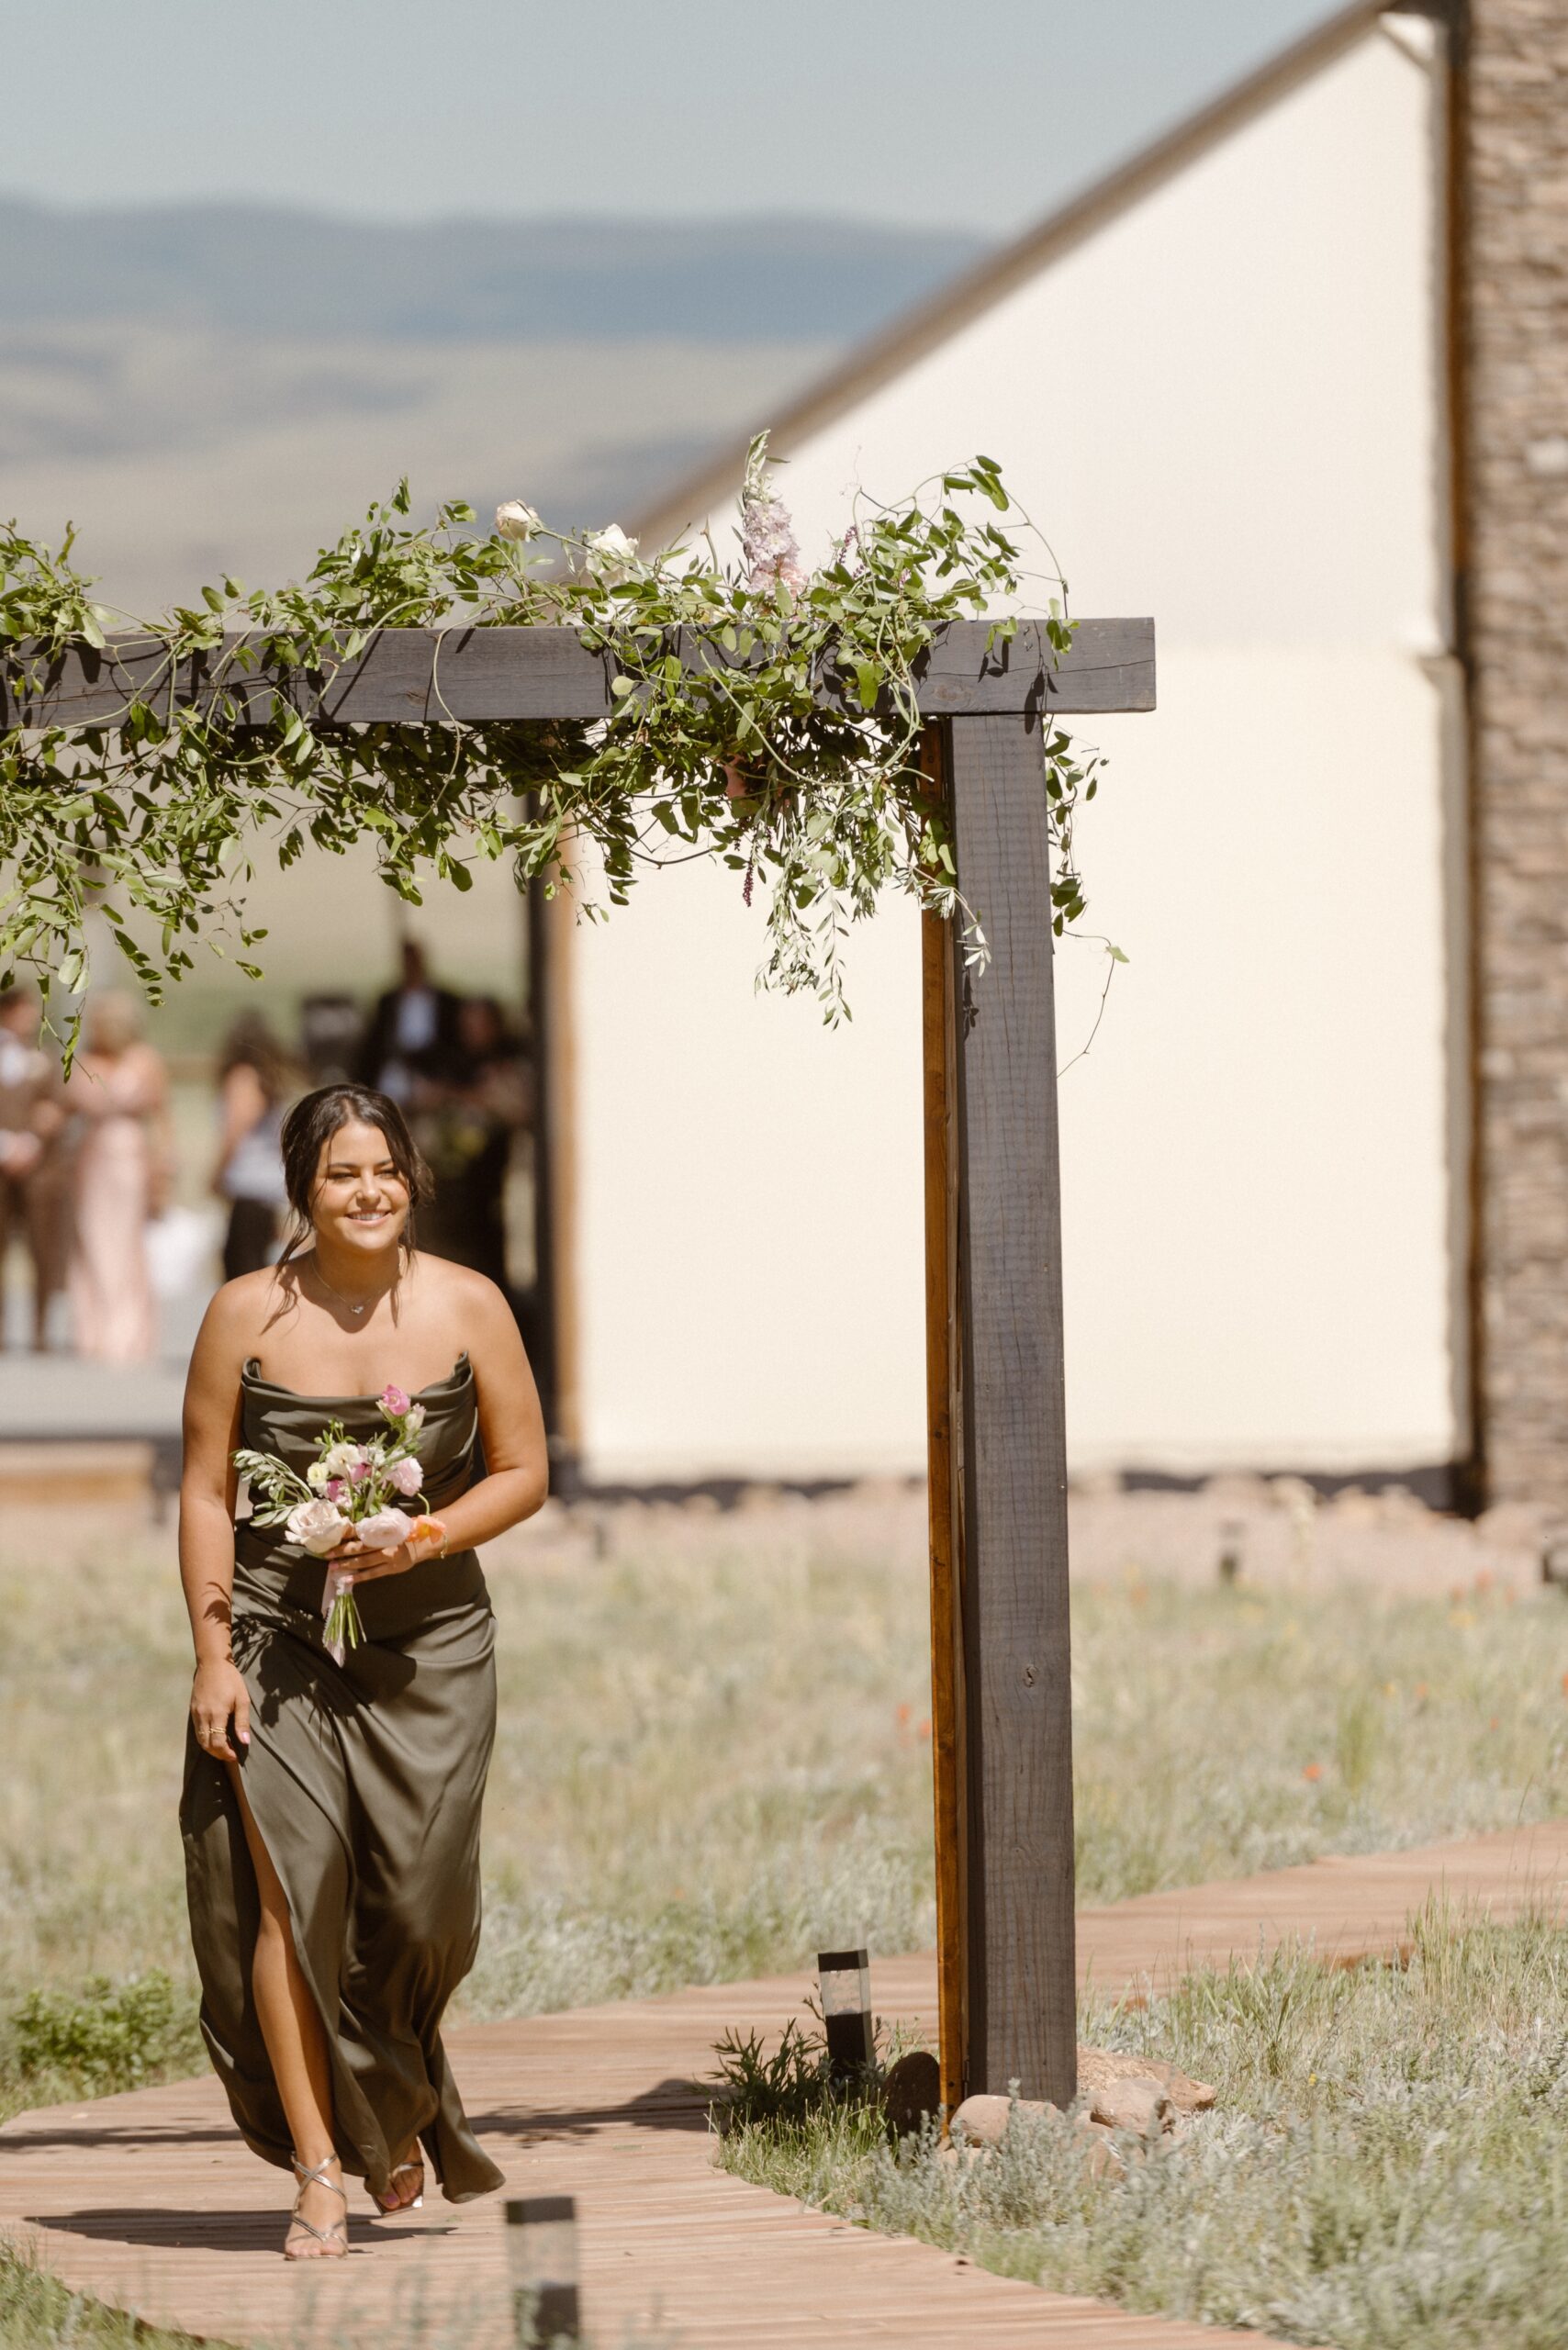 A bridesmaid walks along a wooden path to the wedding ceremony location at Three Peaks Ranch. Photo by Colorado wedding photographer Ashley Joyce.